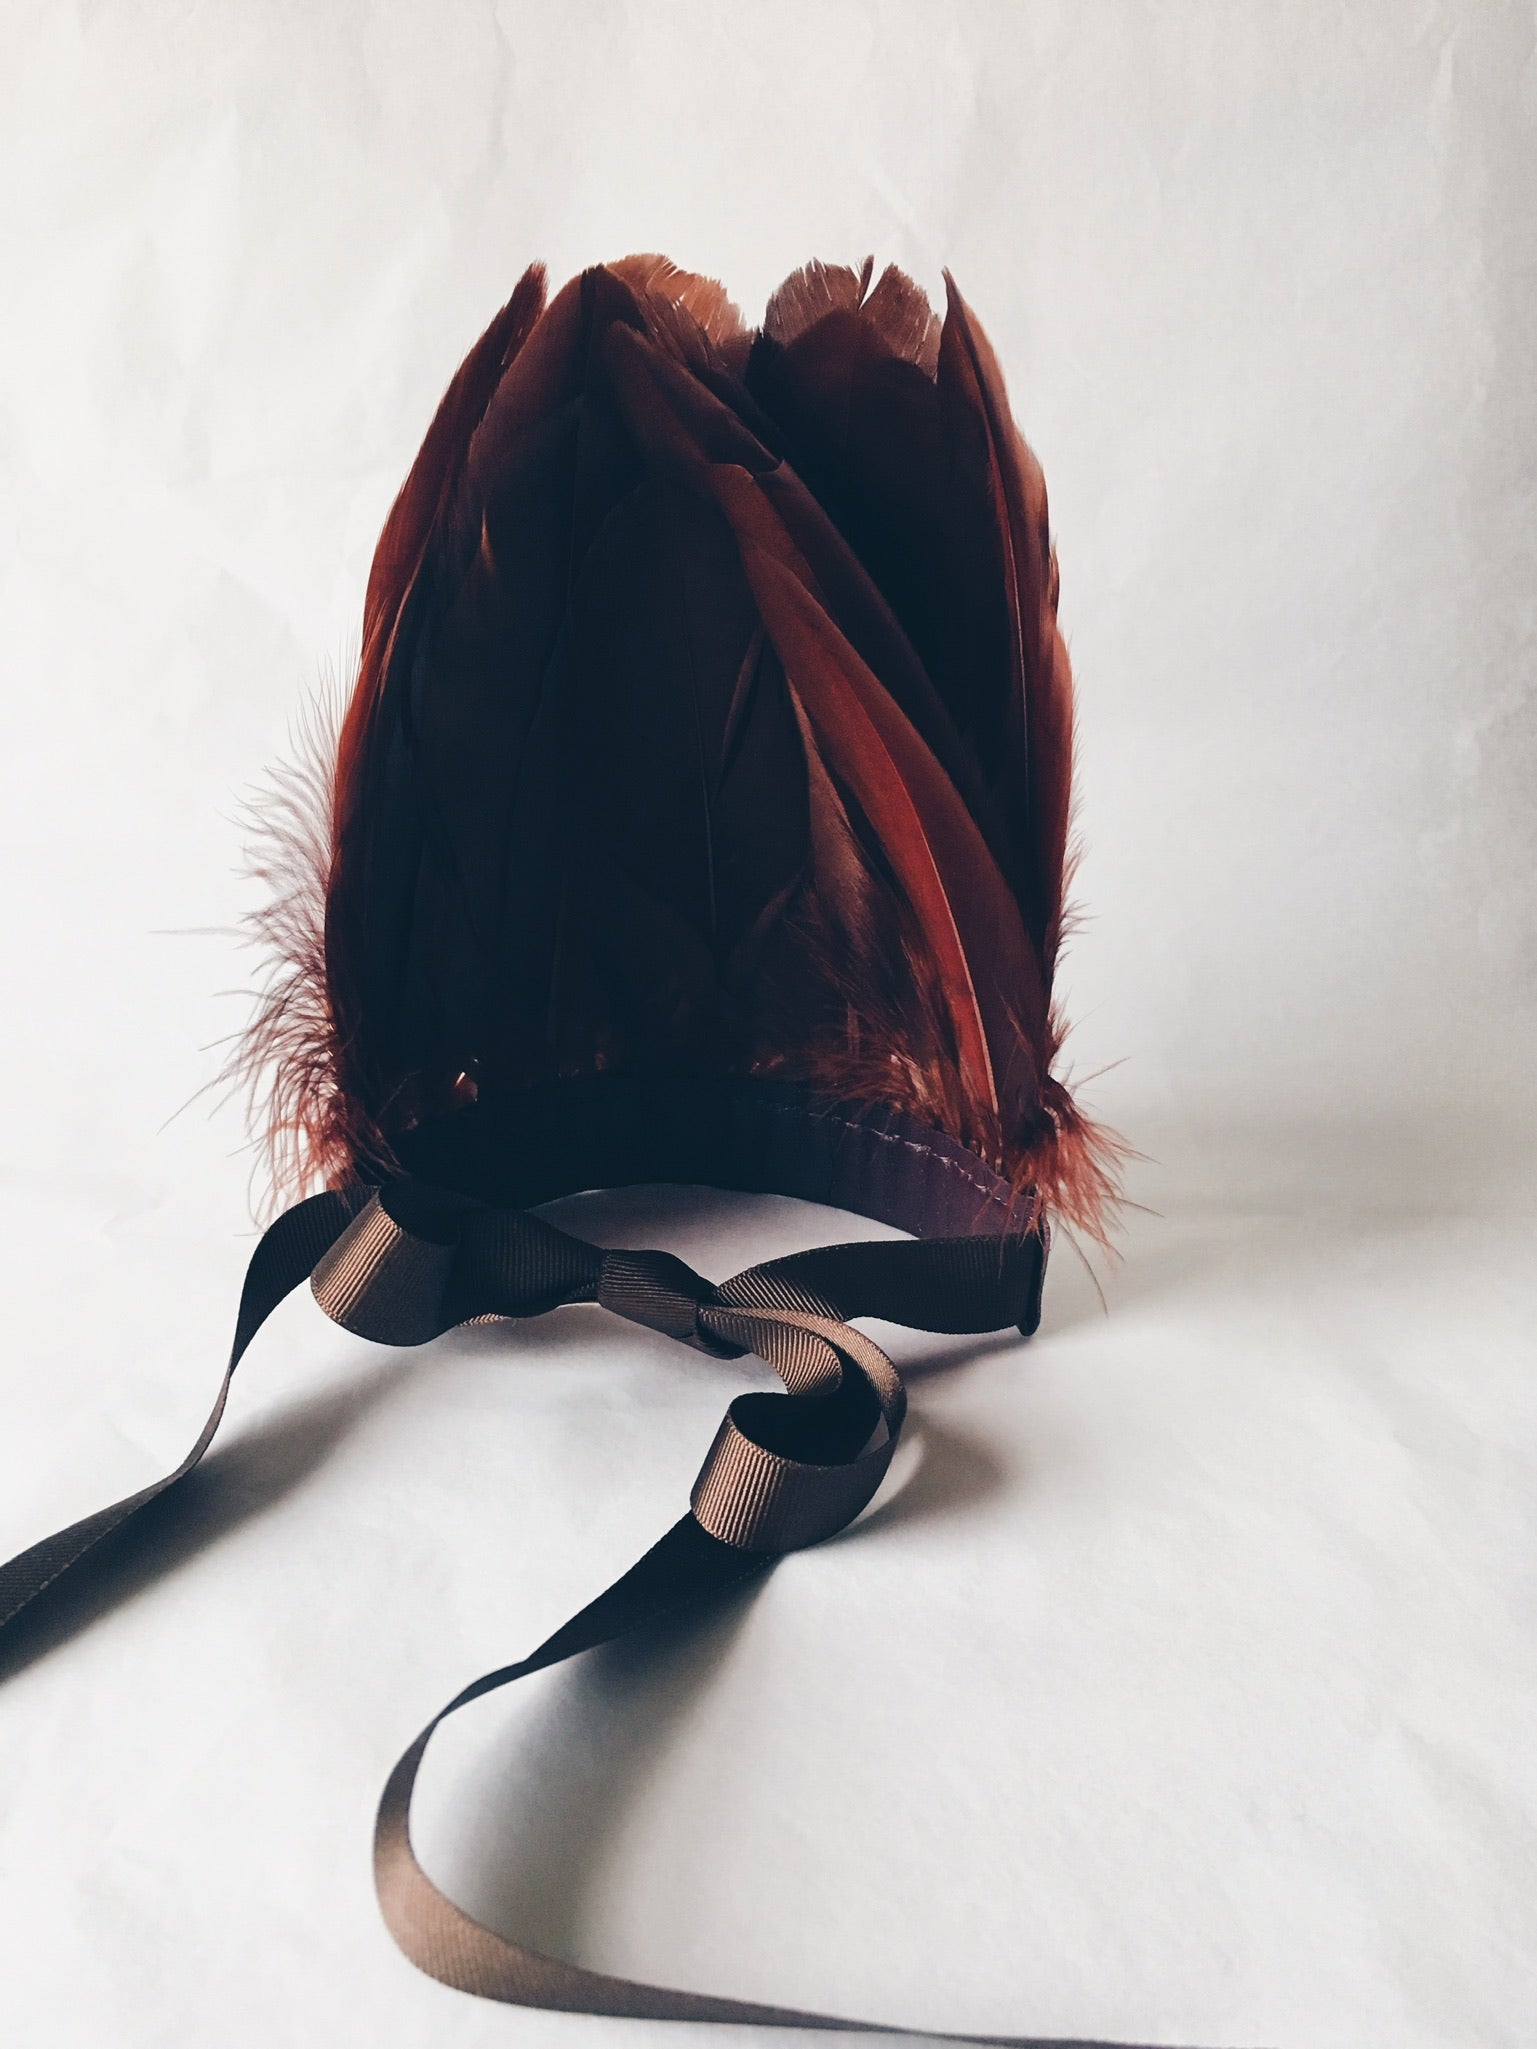 rich chocolate brown feather headdress by For Just ONE Day